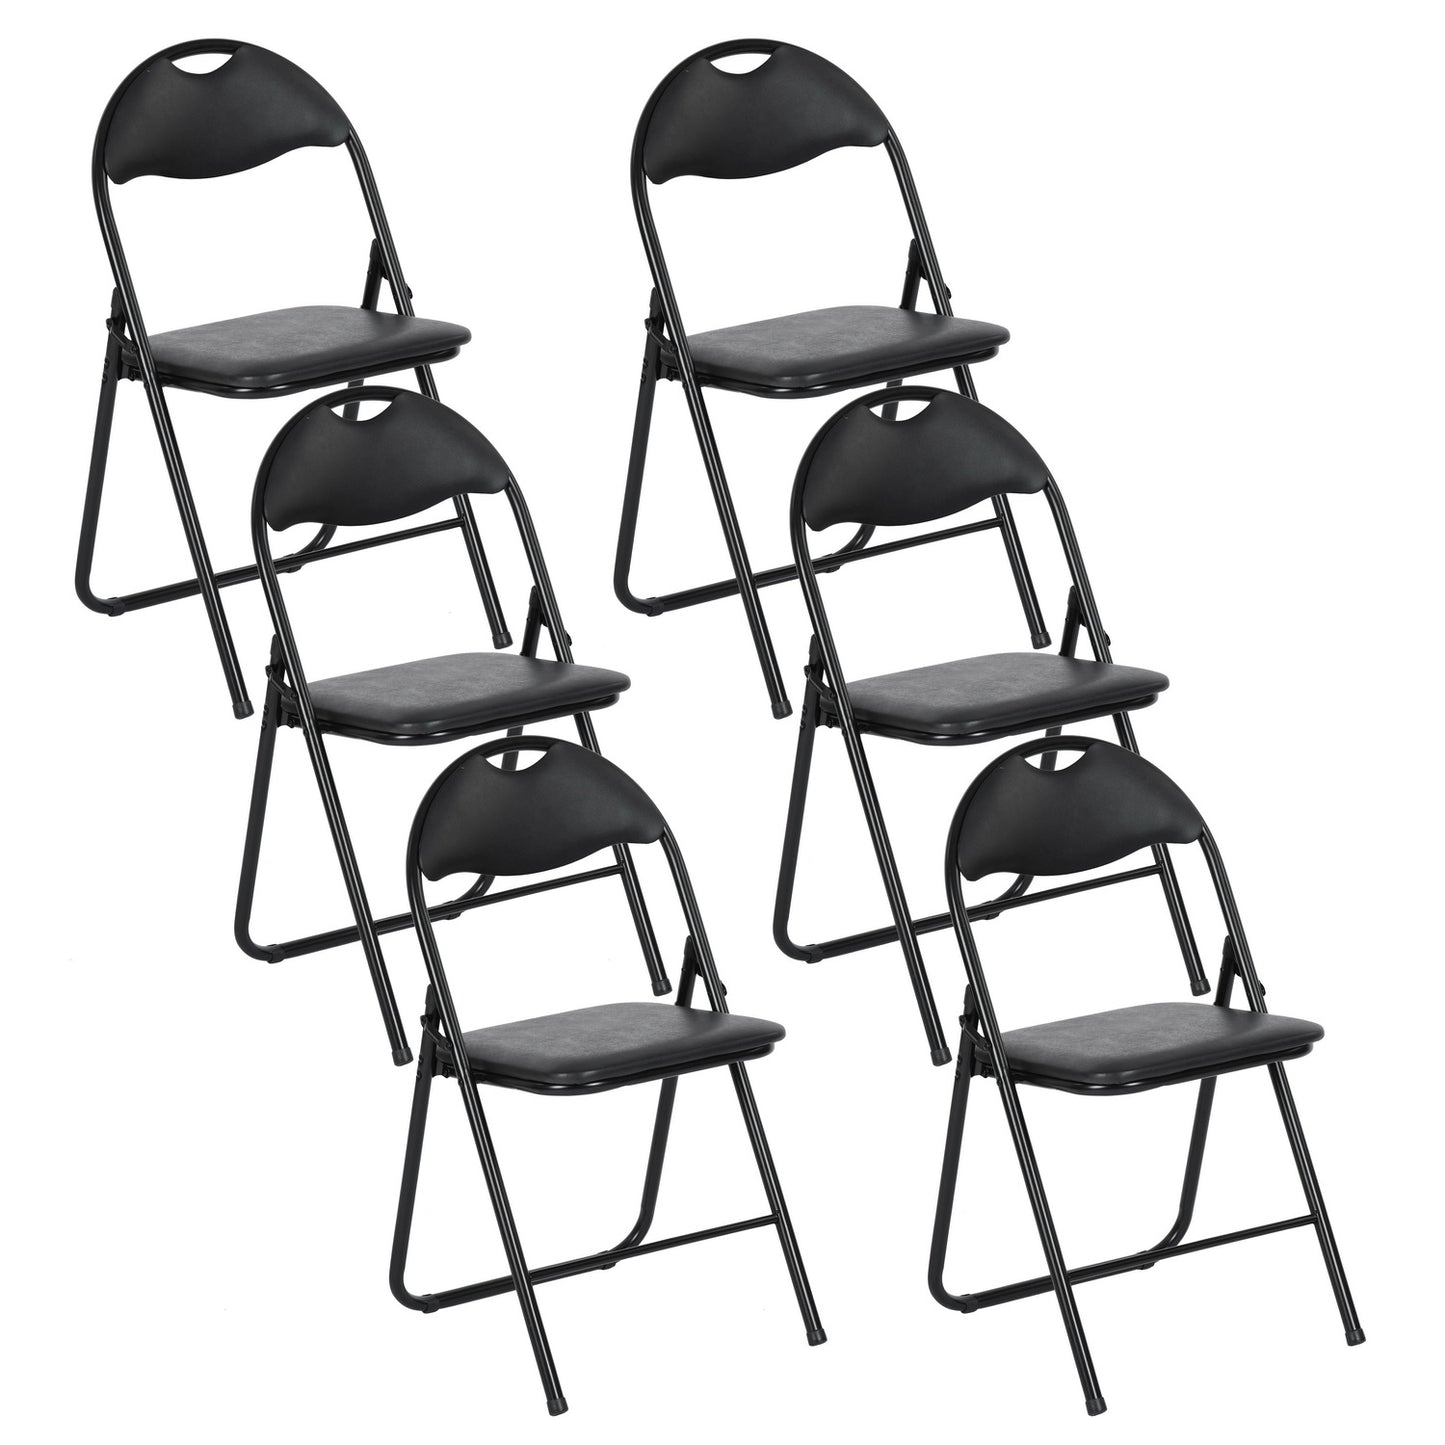 PEACOCKAR Padded Stackable Folding Chairs Set of 2/4/6